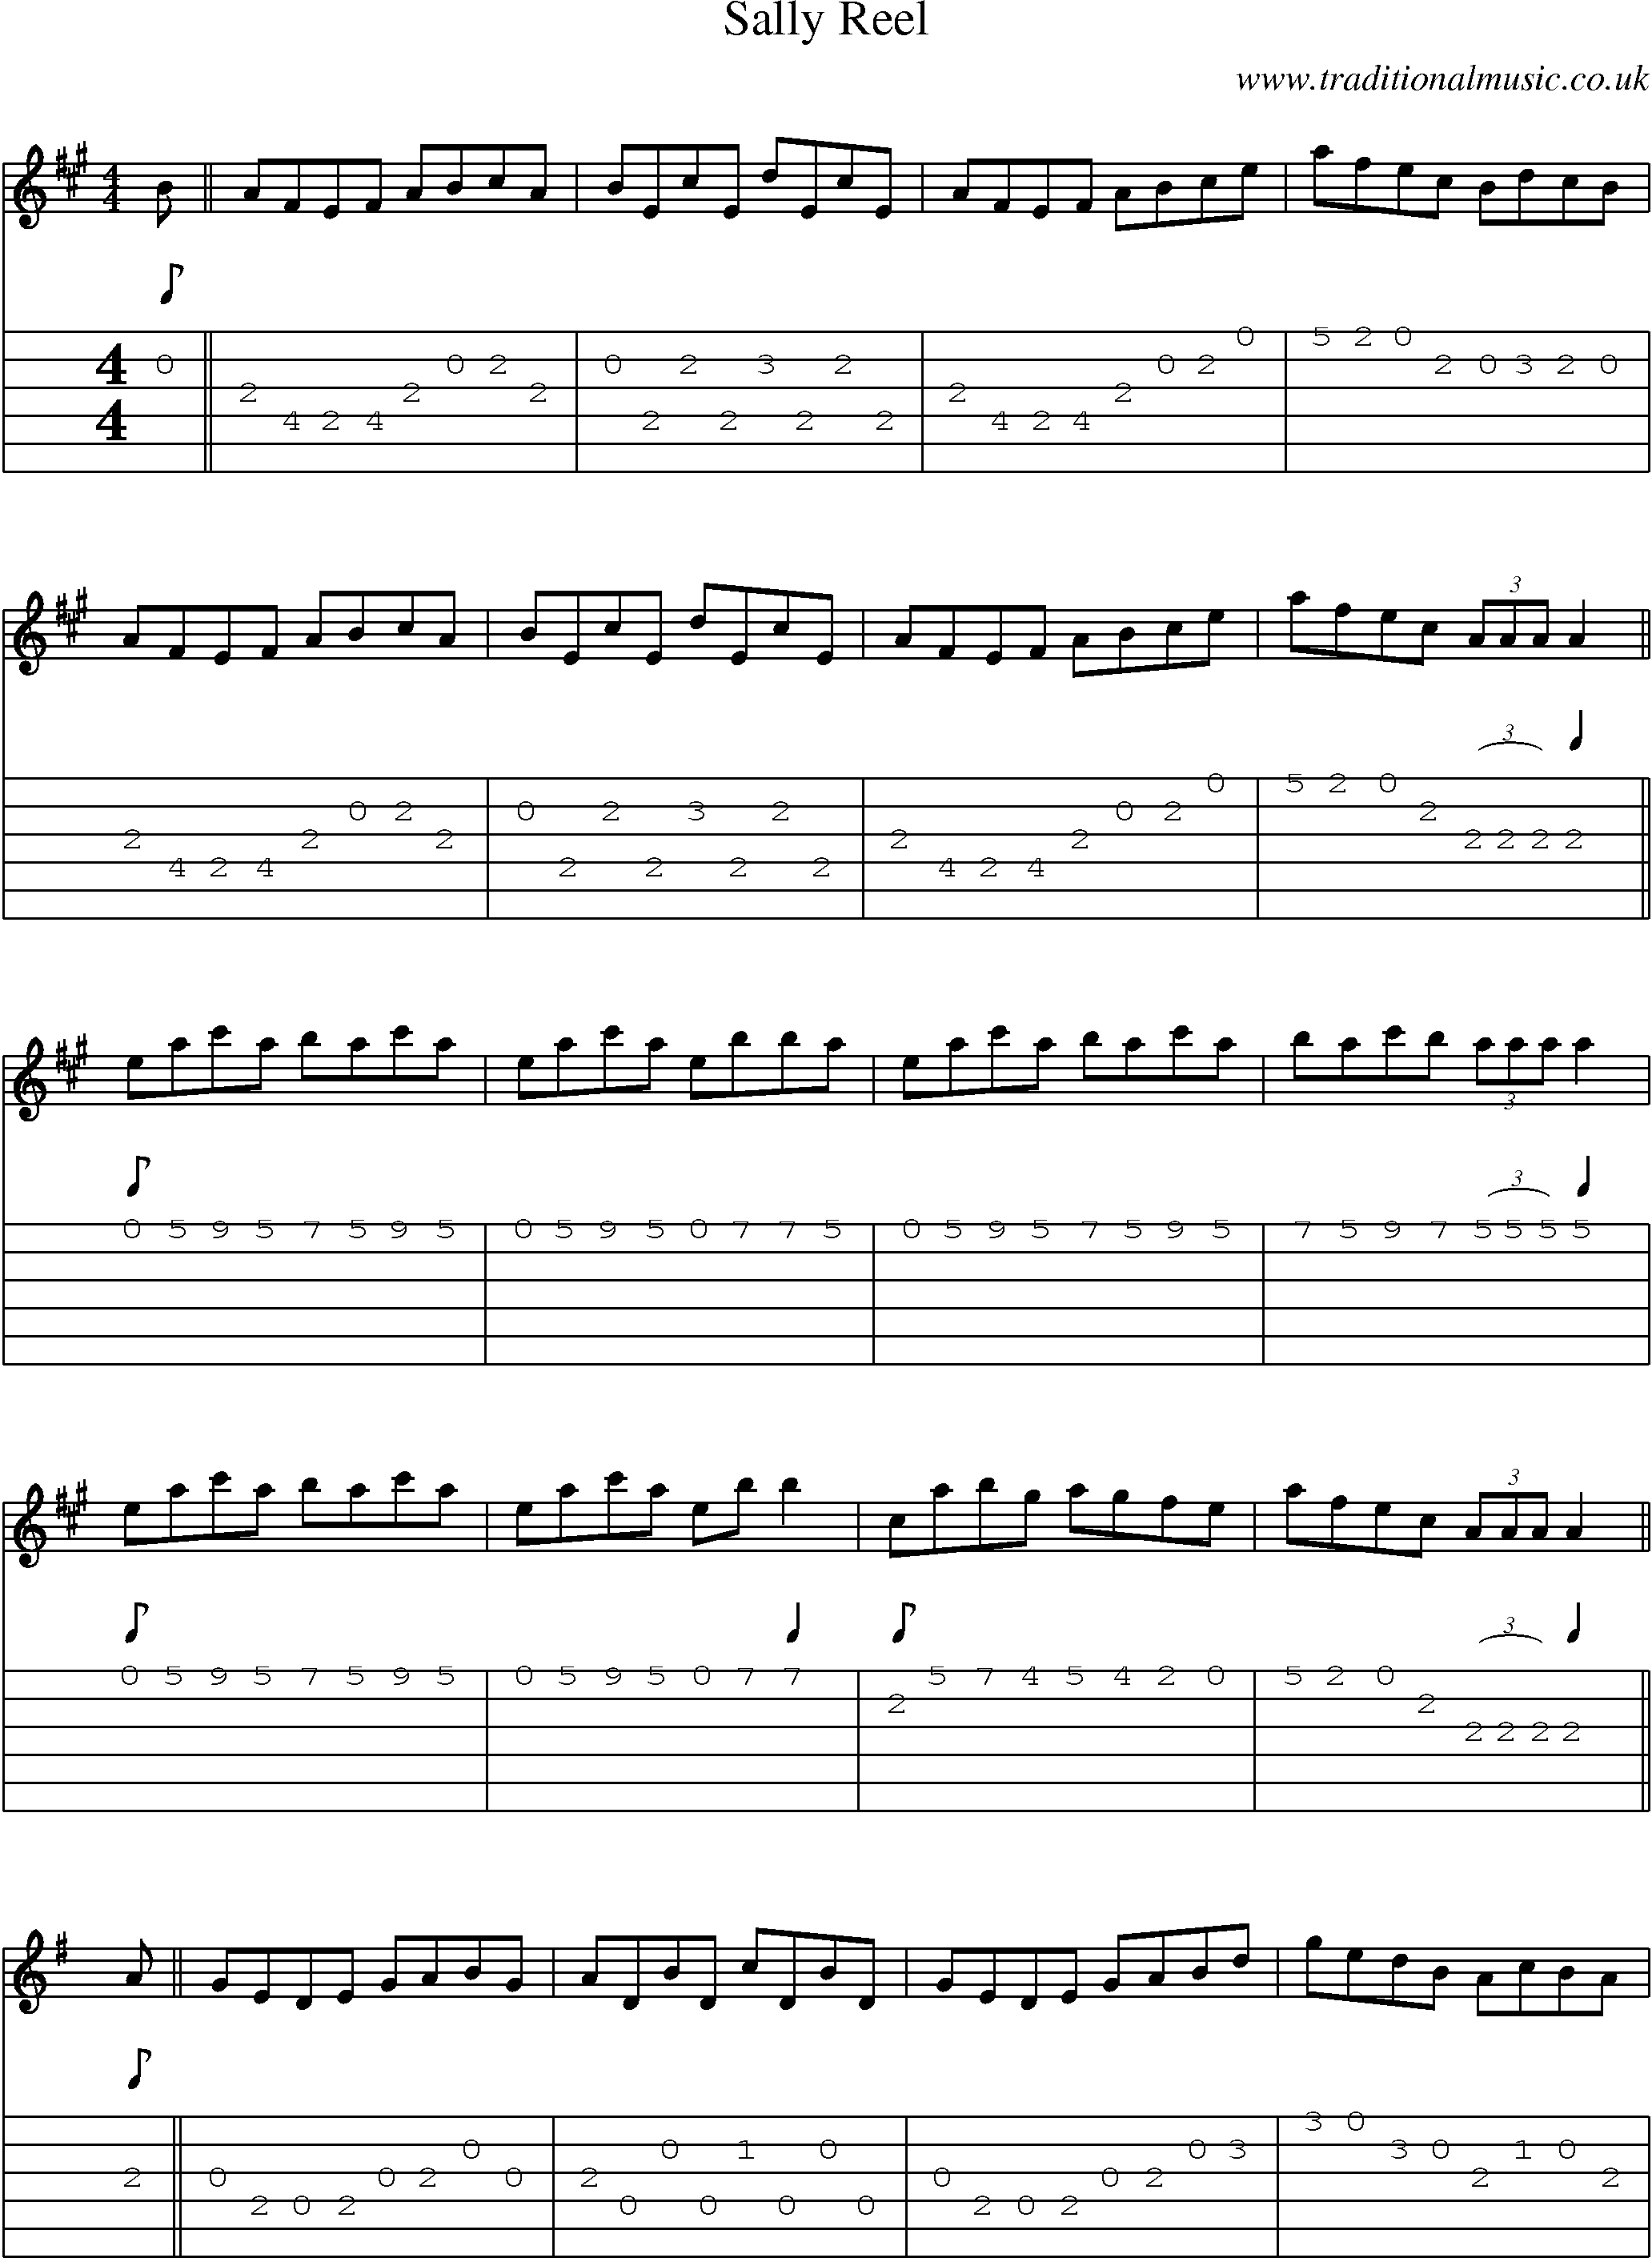 Music Score and Guitar Tabs for Sally Reel